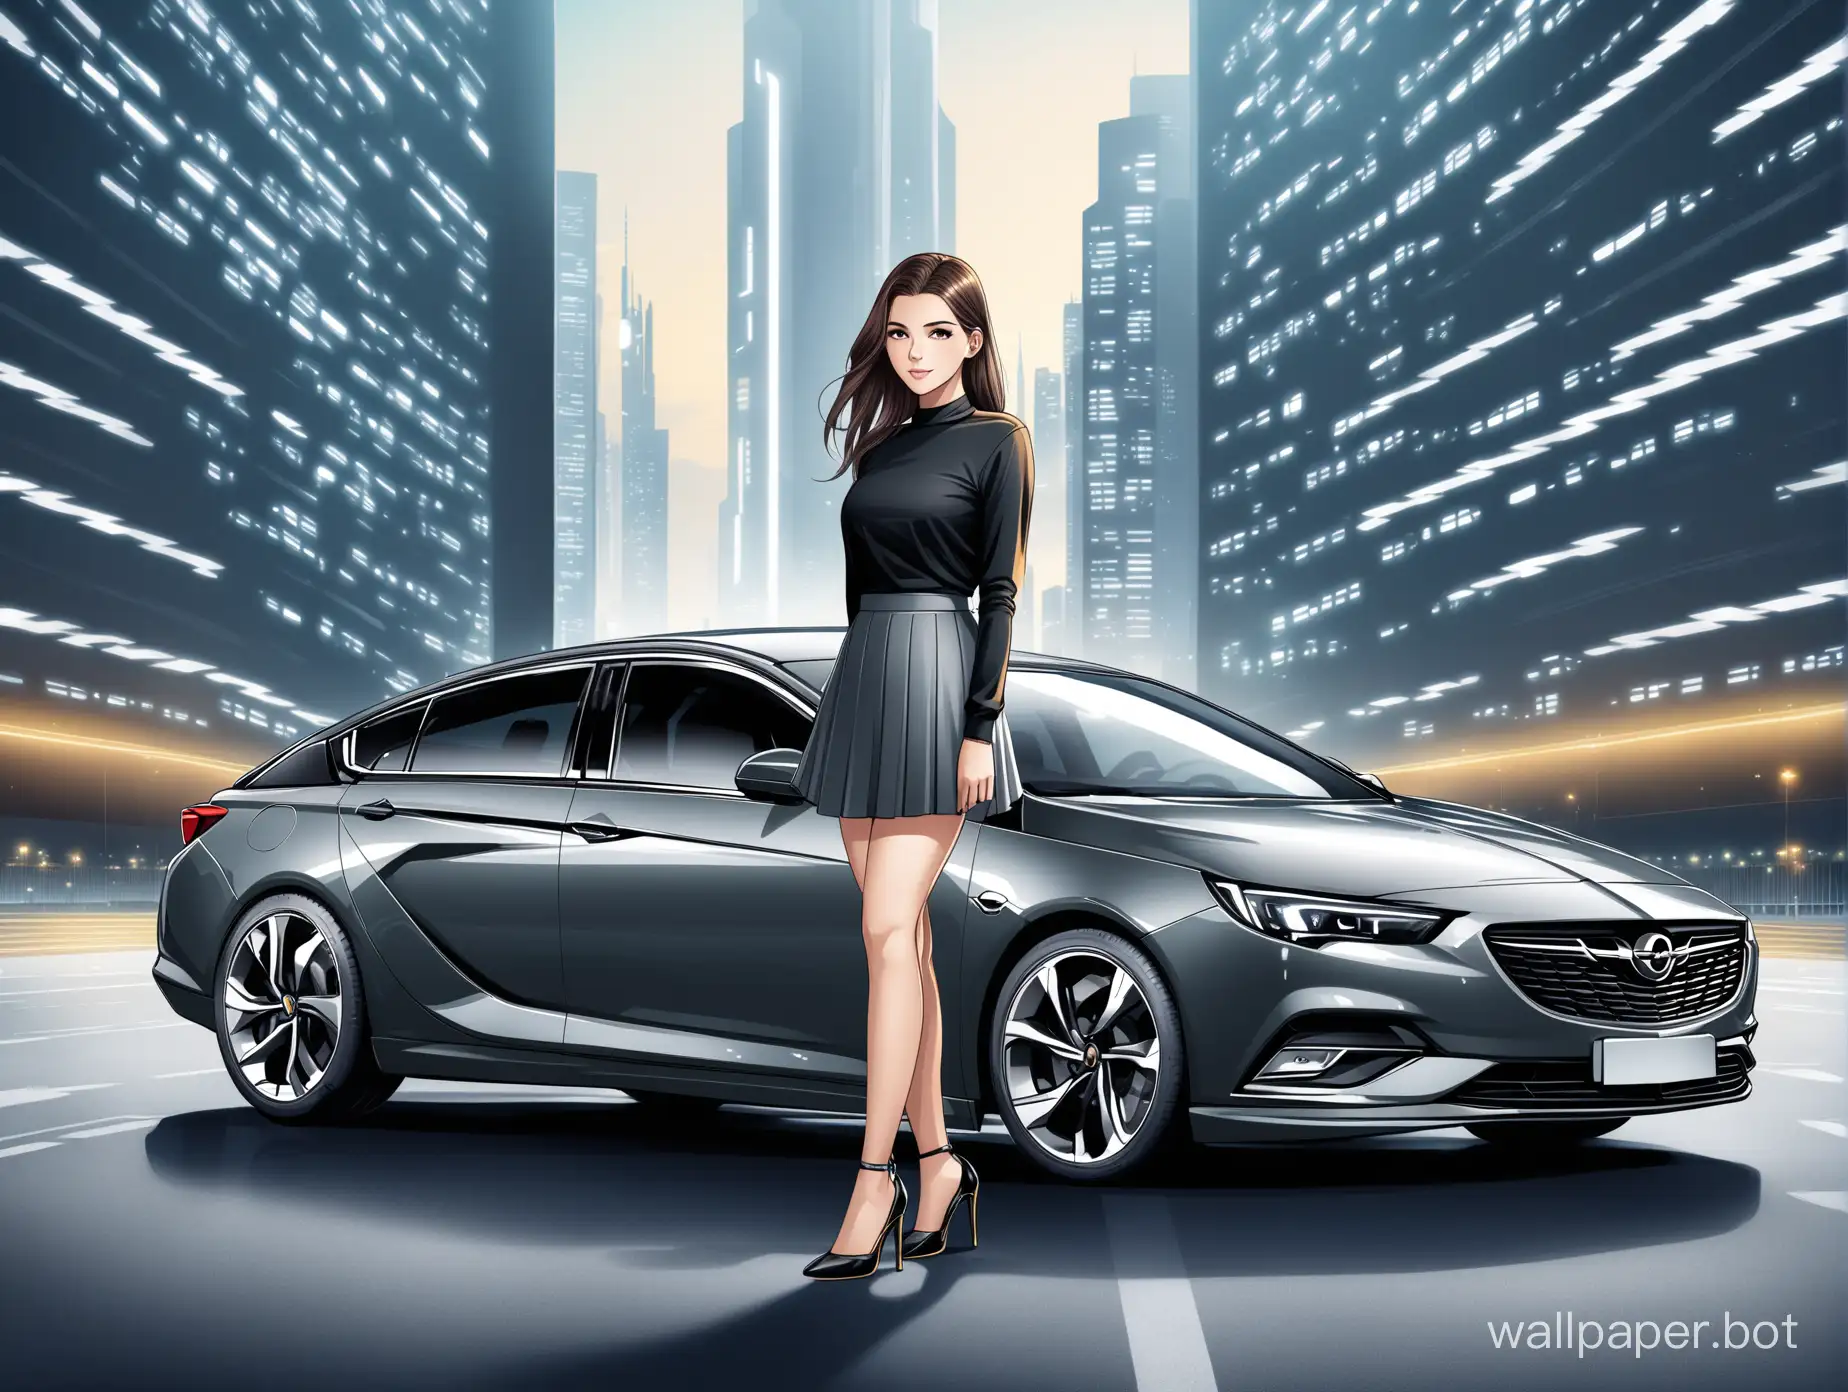 Opel insignia grand sport car in dark grey color with a brunette girl in skirt, high heels standing next to it, with futuristic city backgroun